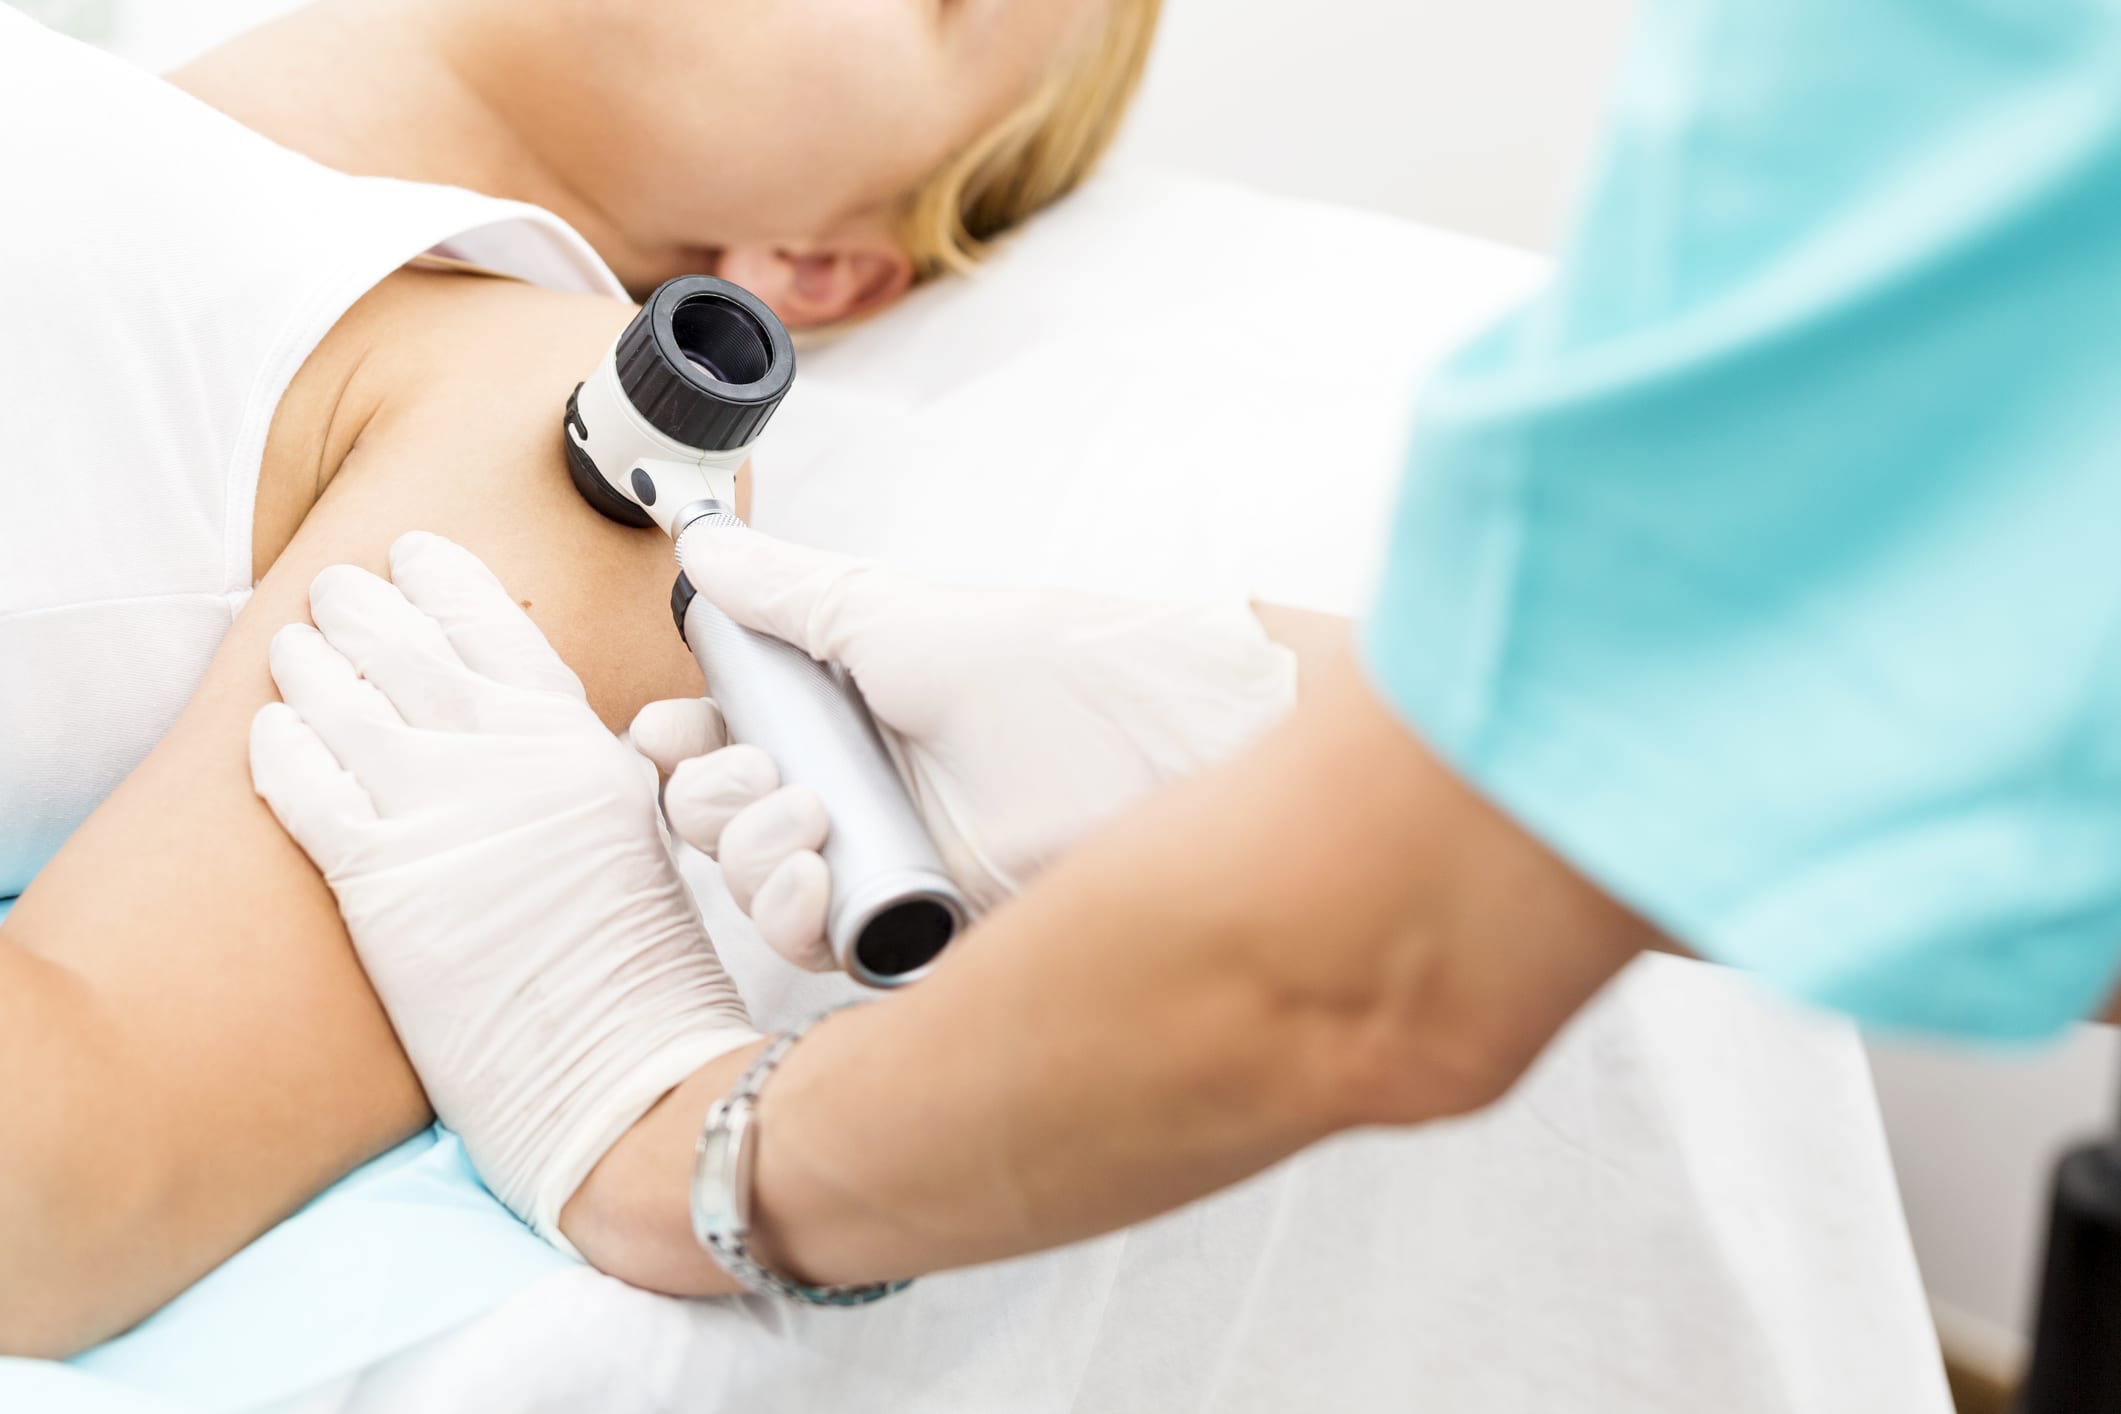 What Happens During a Skin Cancer Screening? - MIBluesPerspectives